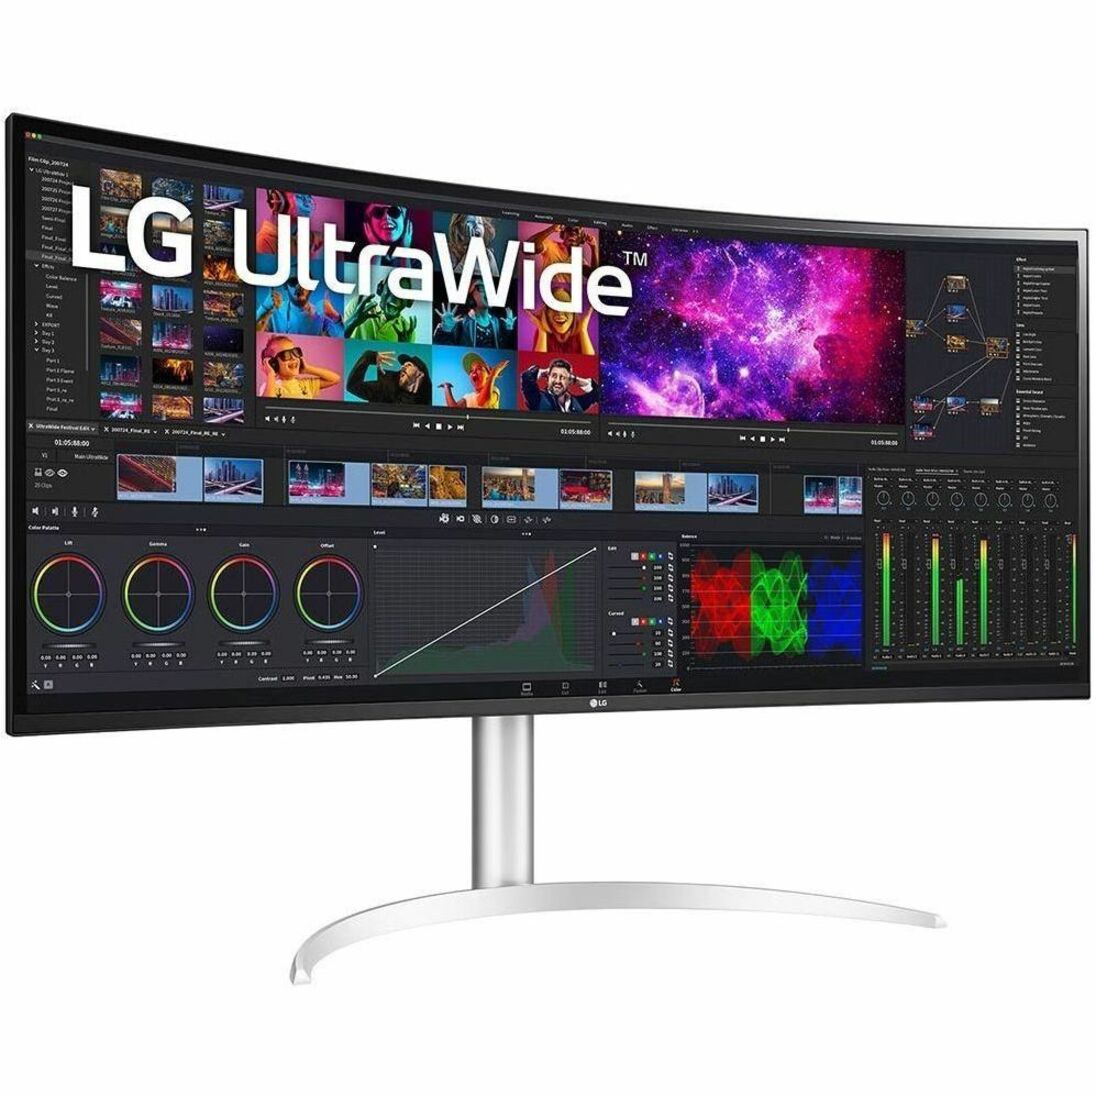 LG 40BP95C-W 40" Dual Quad HD (DQHD) LCD Monitor - 21:9, HDR10, Picture by Picture, OnScreen Control